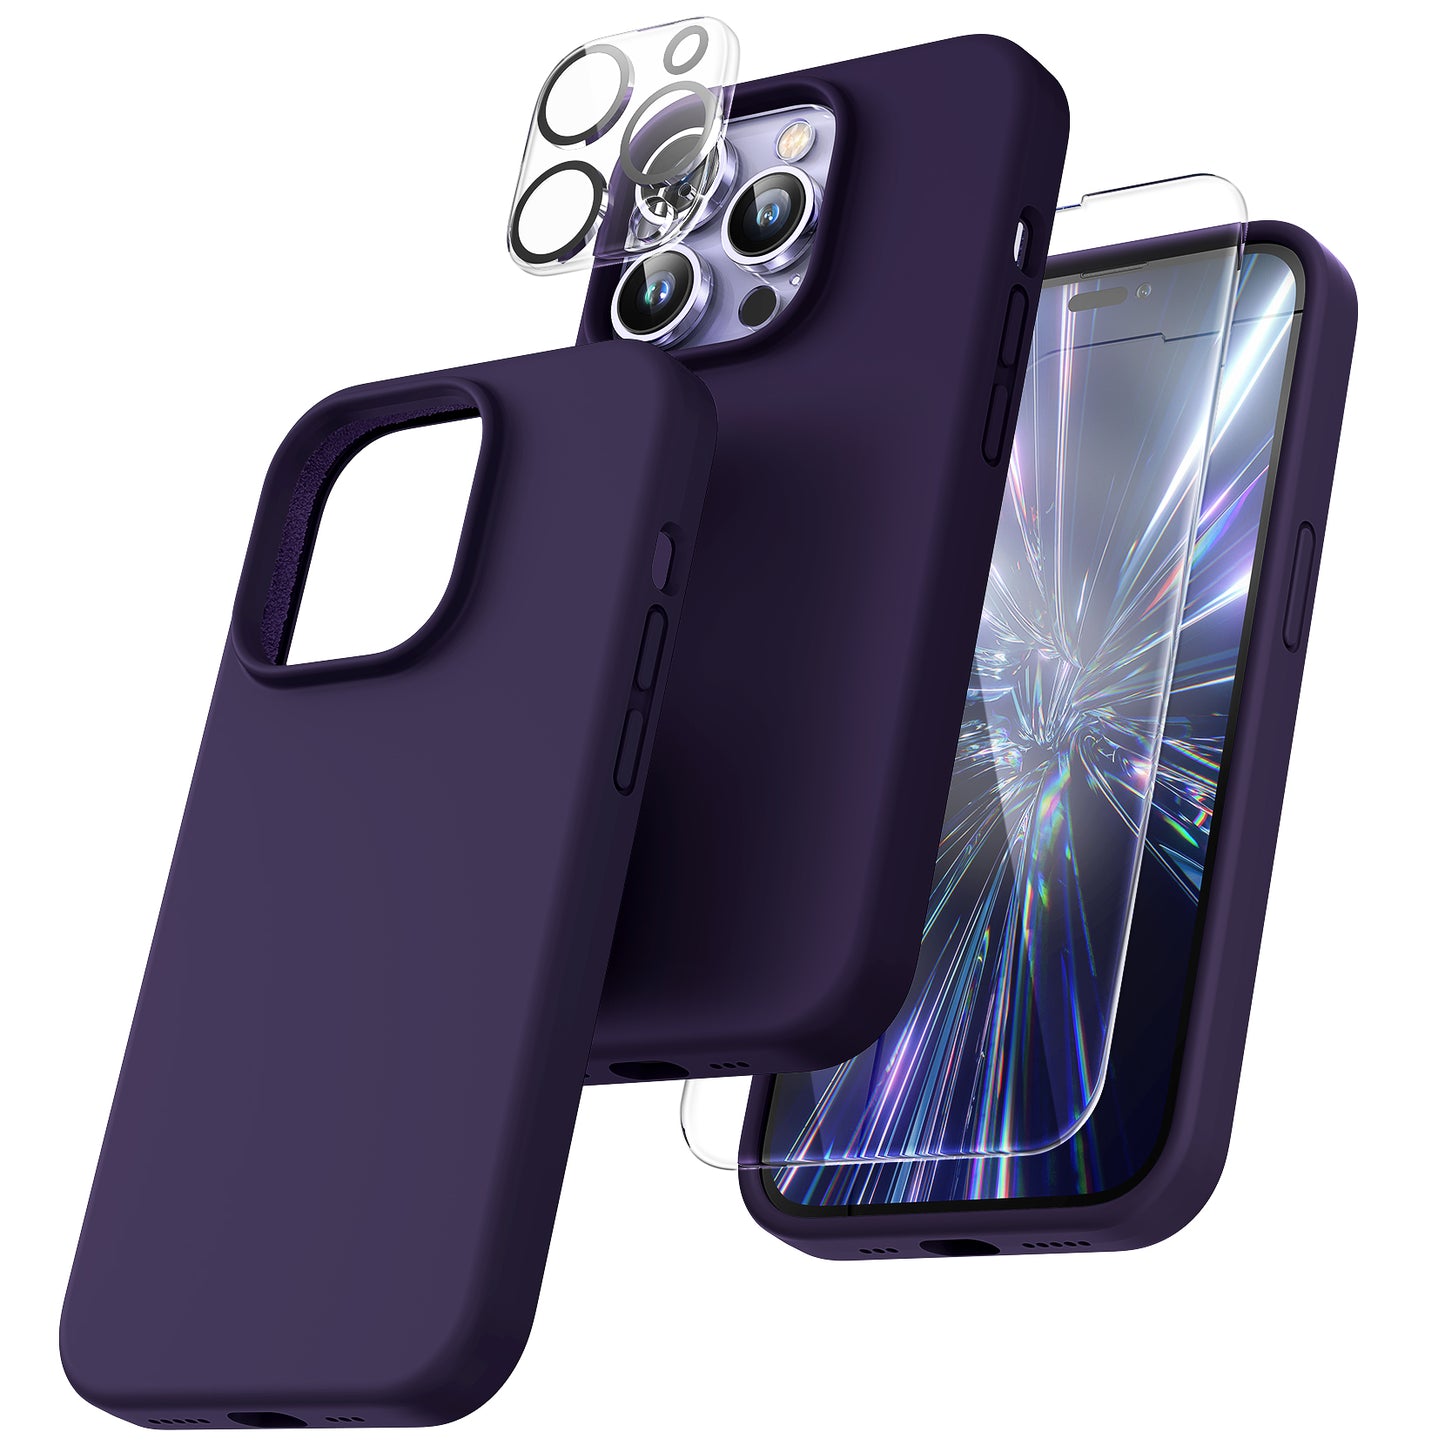 TOCOL [5 in 1] for iPhone 14 Pro Max Case, 2 Screen Protector + 2 Camera Lens Protector, Slim Liquid Silicone Phone Case iPhone 14 Pro Max 6.7 Inch, [Anti-Scratch] [Drop Protection], Deep Purple